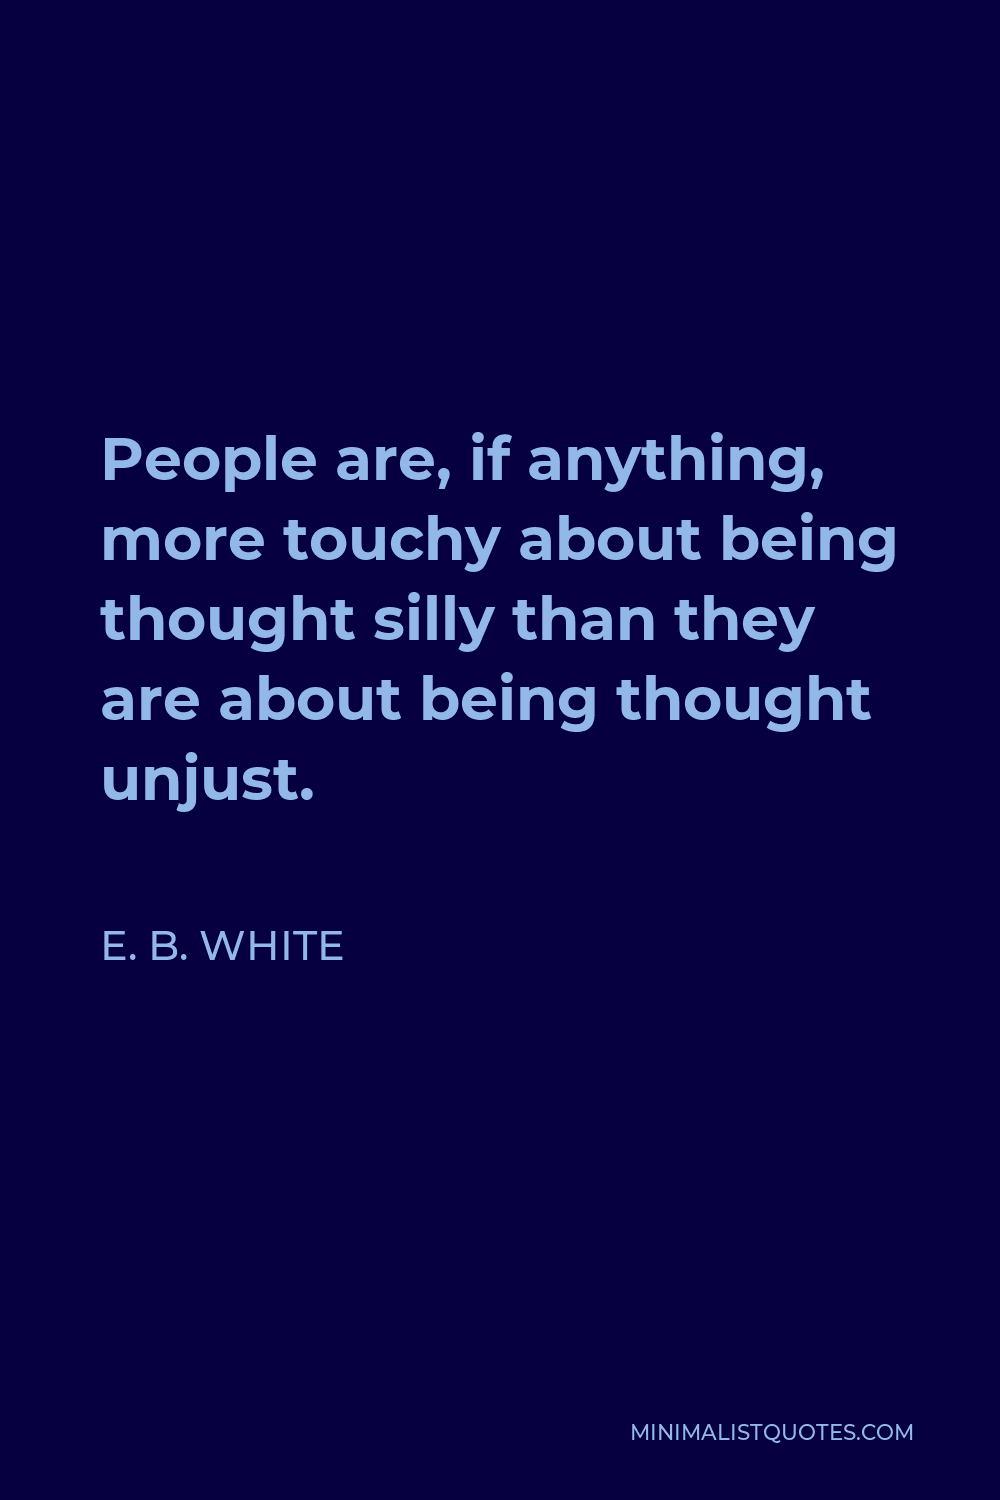 E. B. White Quote - People are, if anything, more touchy about being thought silly than they are about being thought unjust.